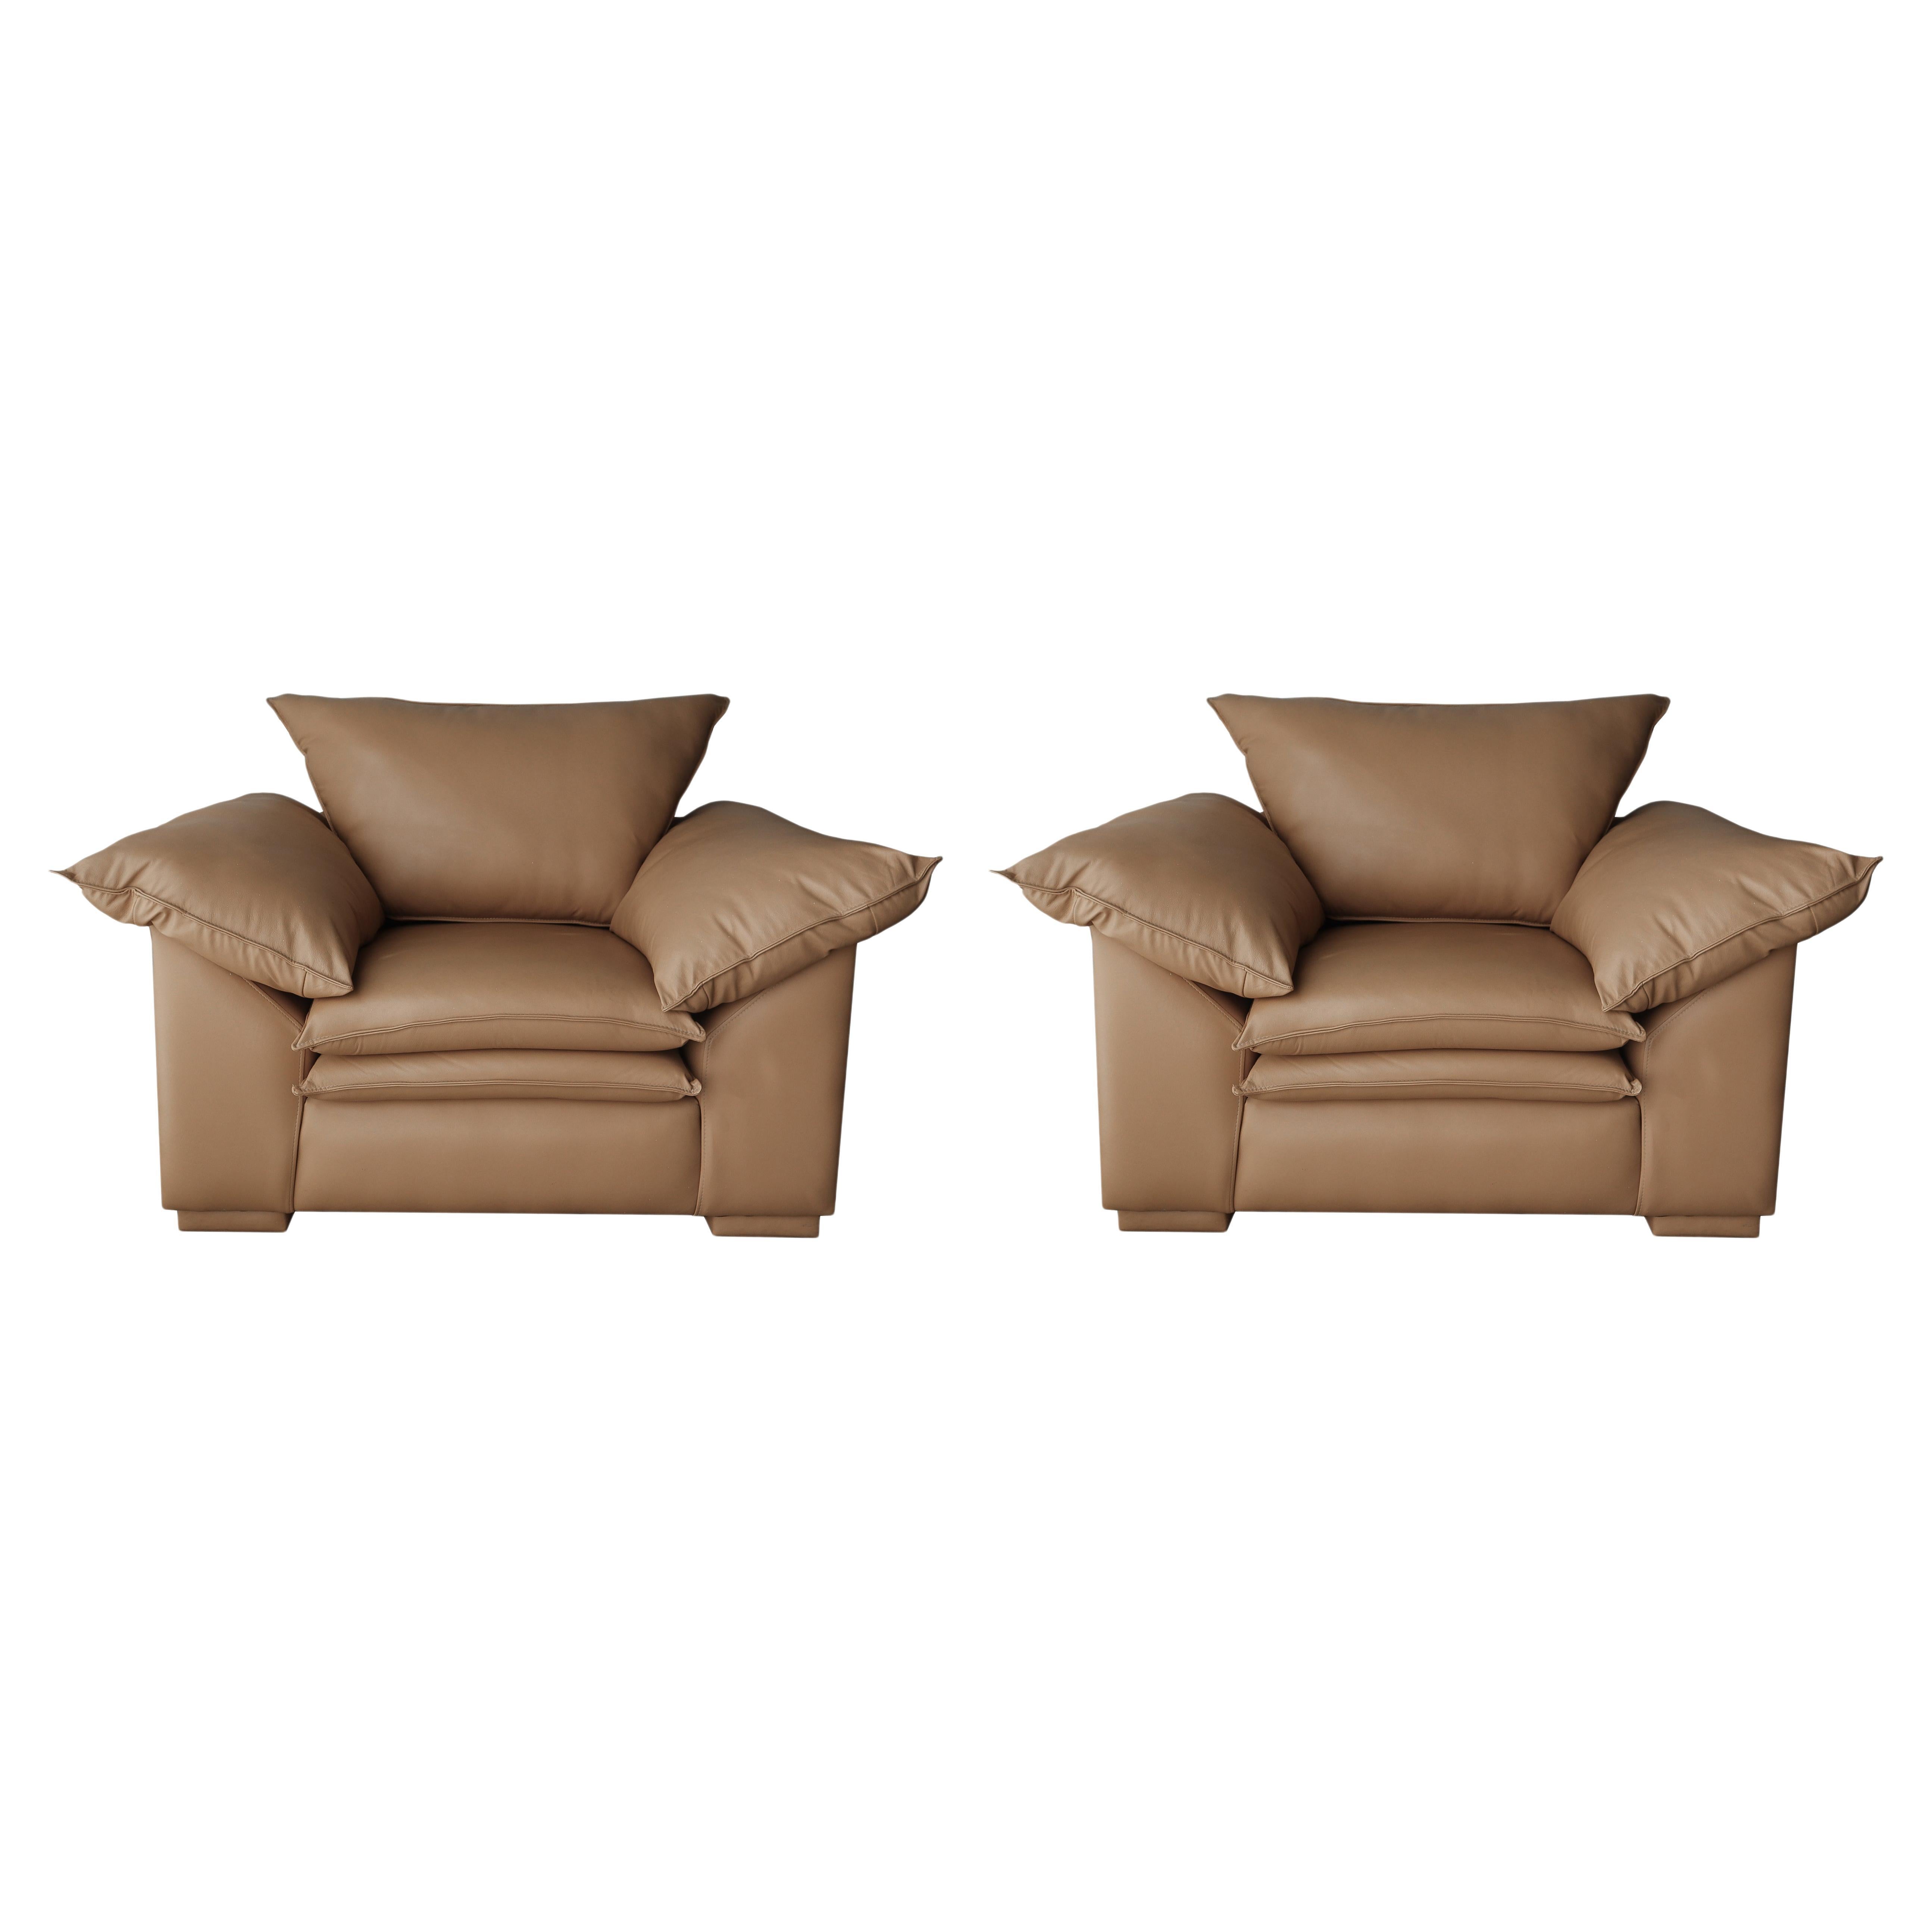 Pair of Over-Sized Post-Modern Leather Lounge Chairs